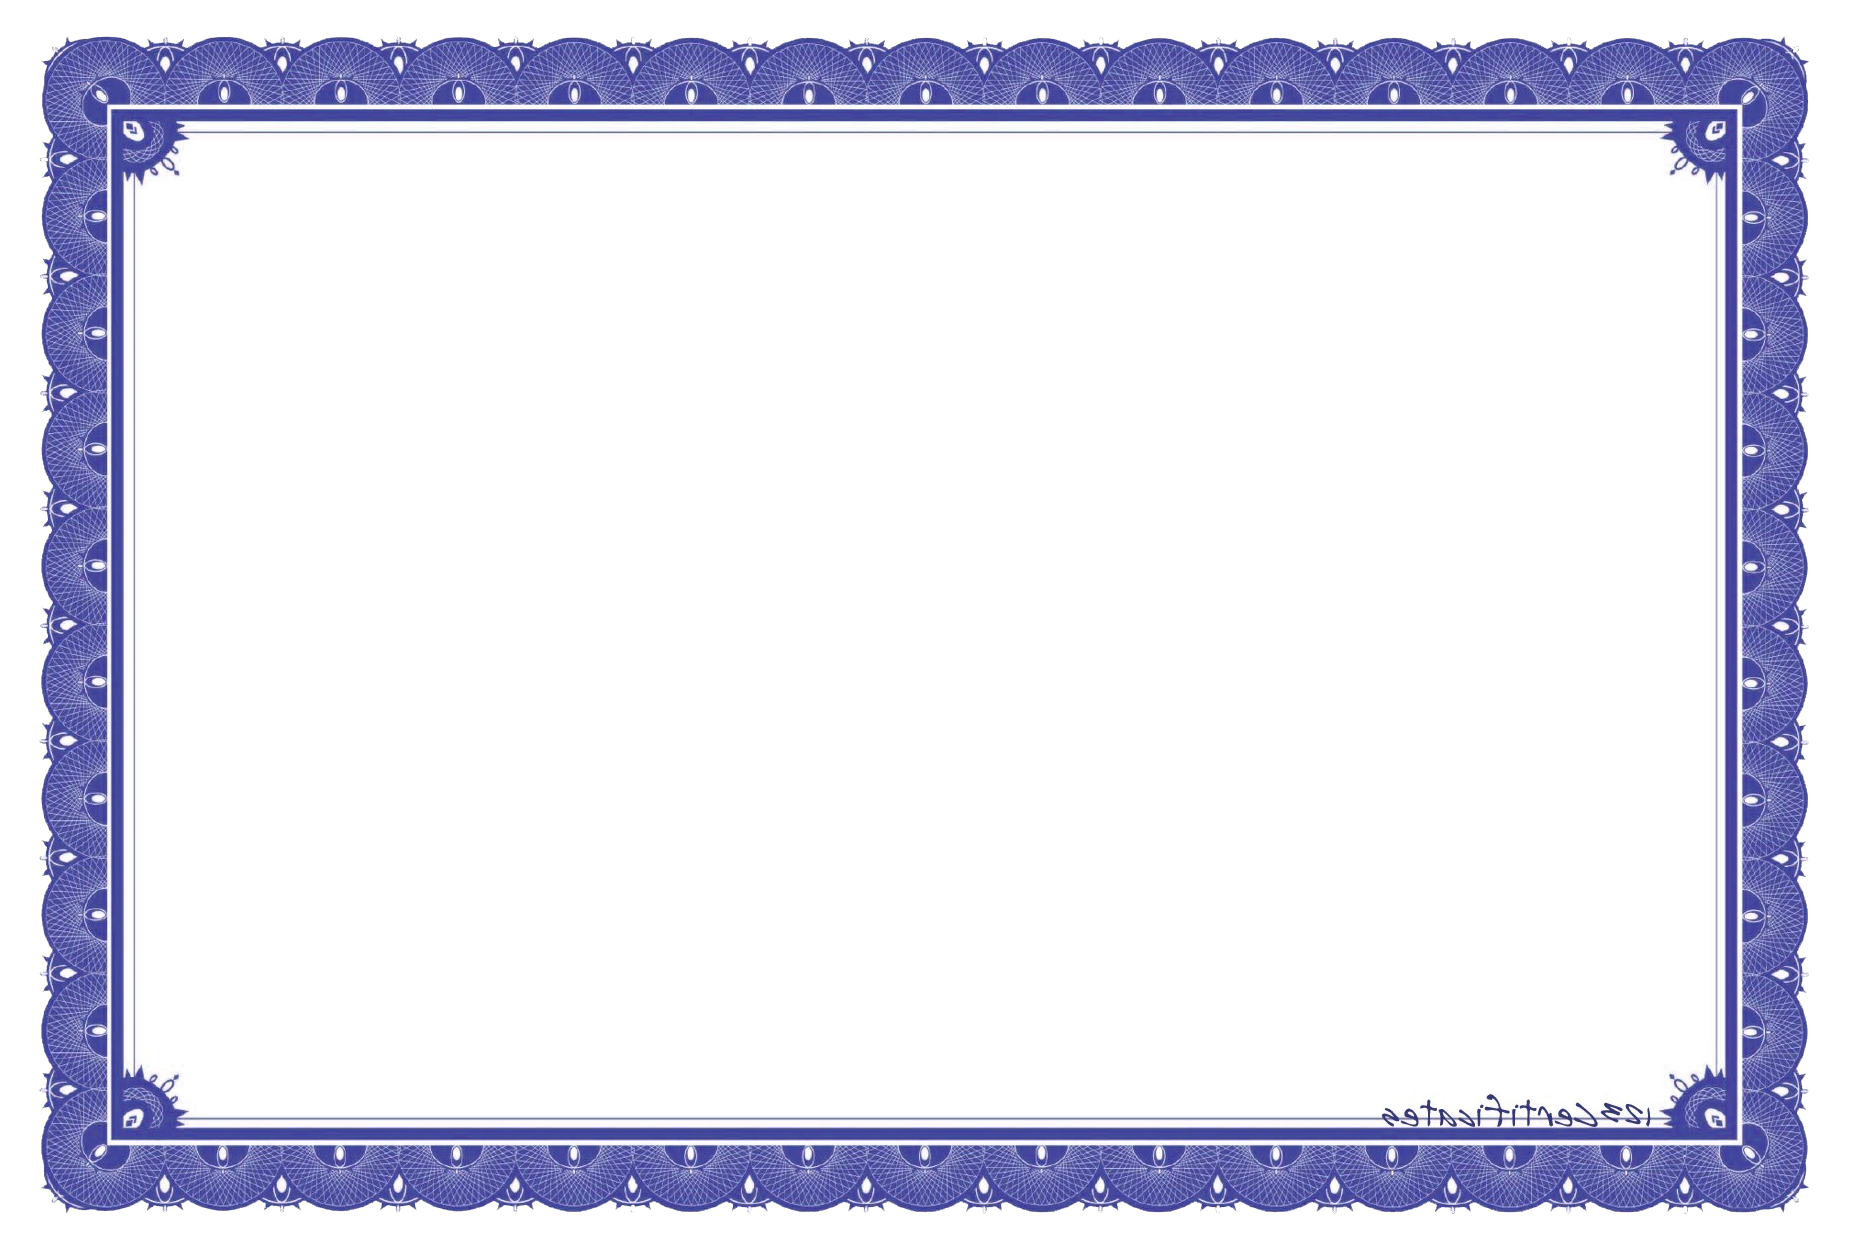 Certificate Template Png - Pluspng, Transparent background PNG HD thumbnail